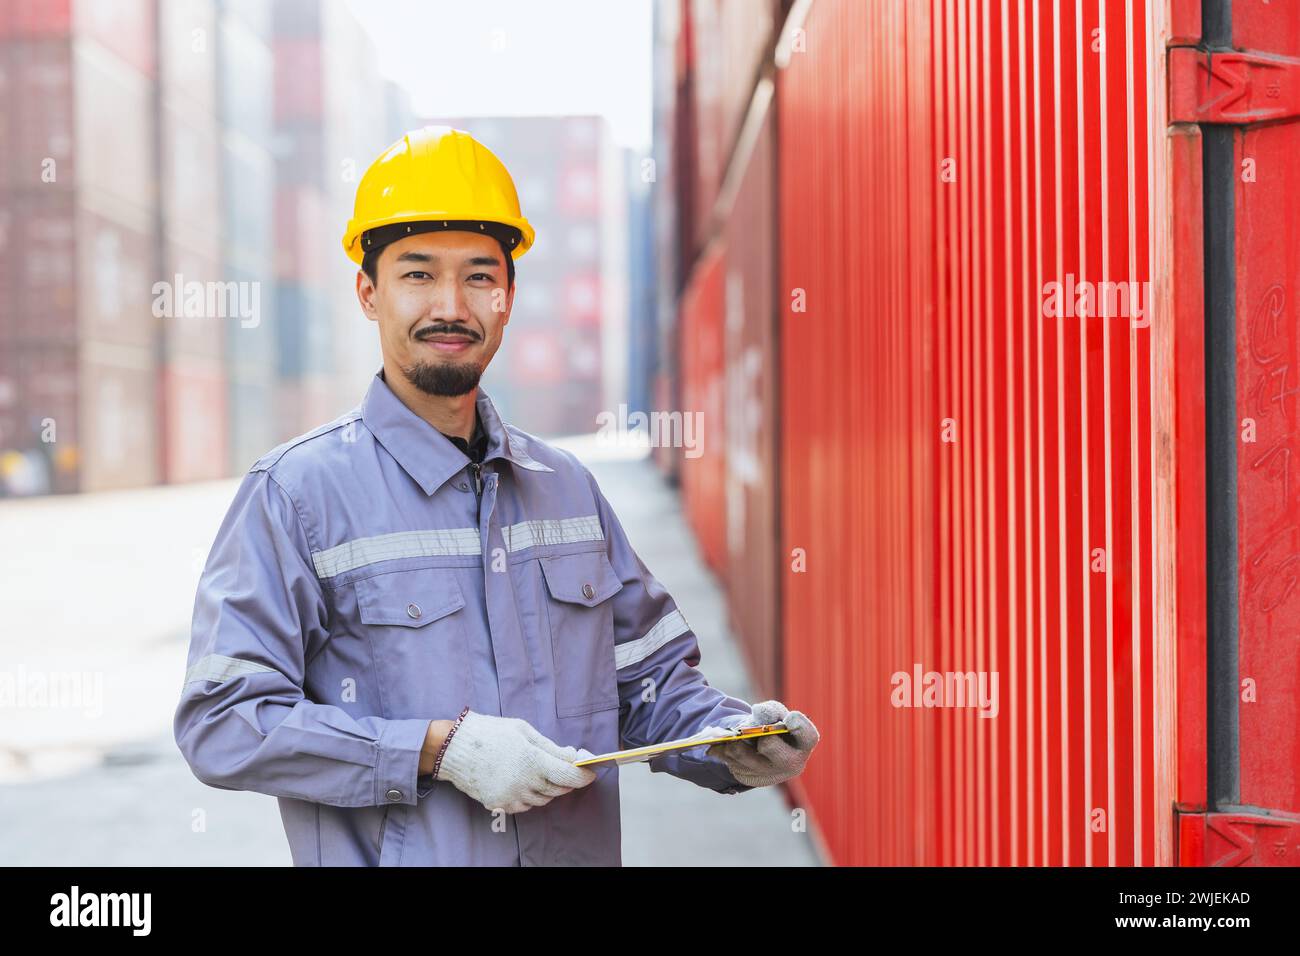 Japanese male smart worker working in container port cargo. Japan shipping logistics industry customs staff. Stock Photo